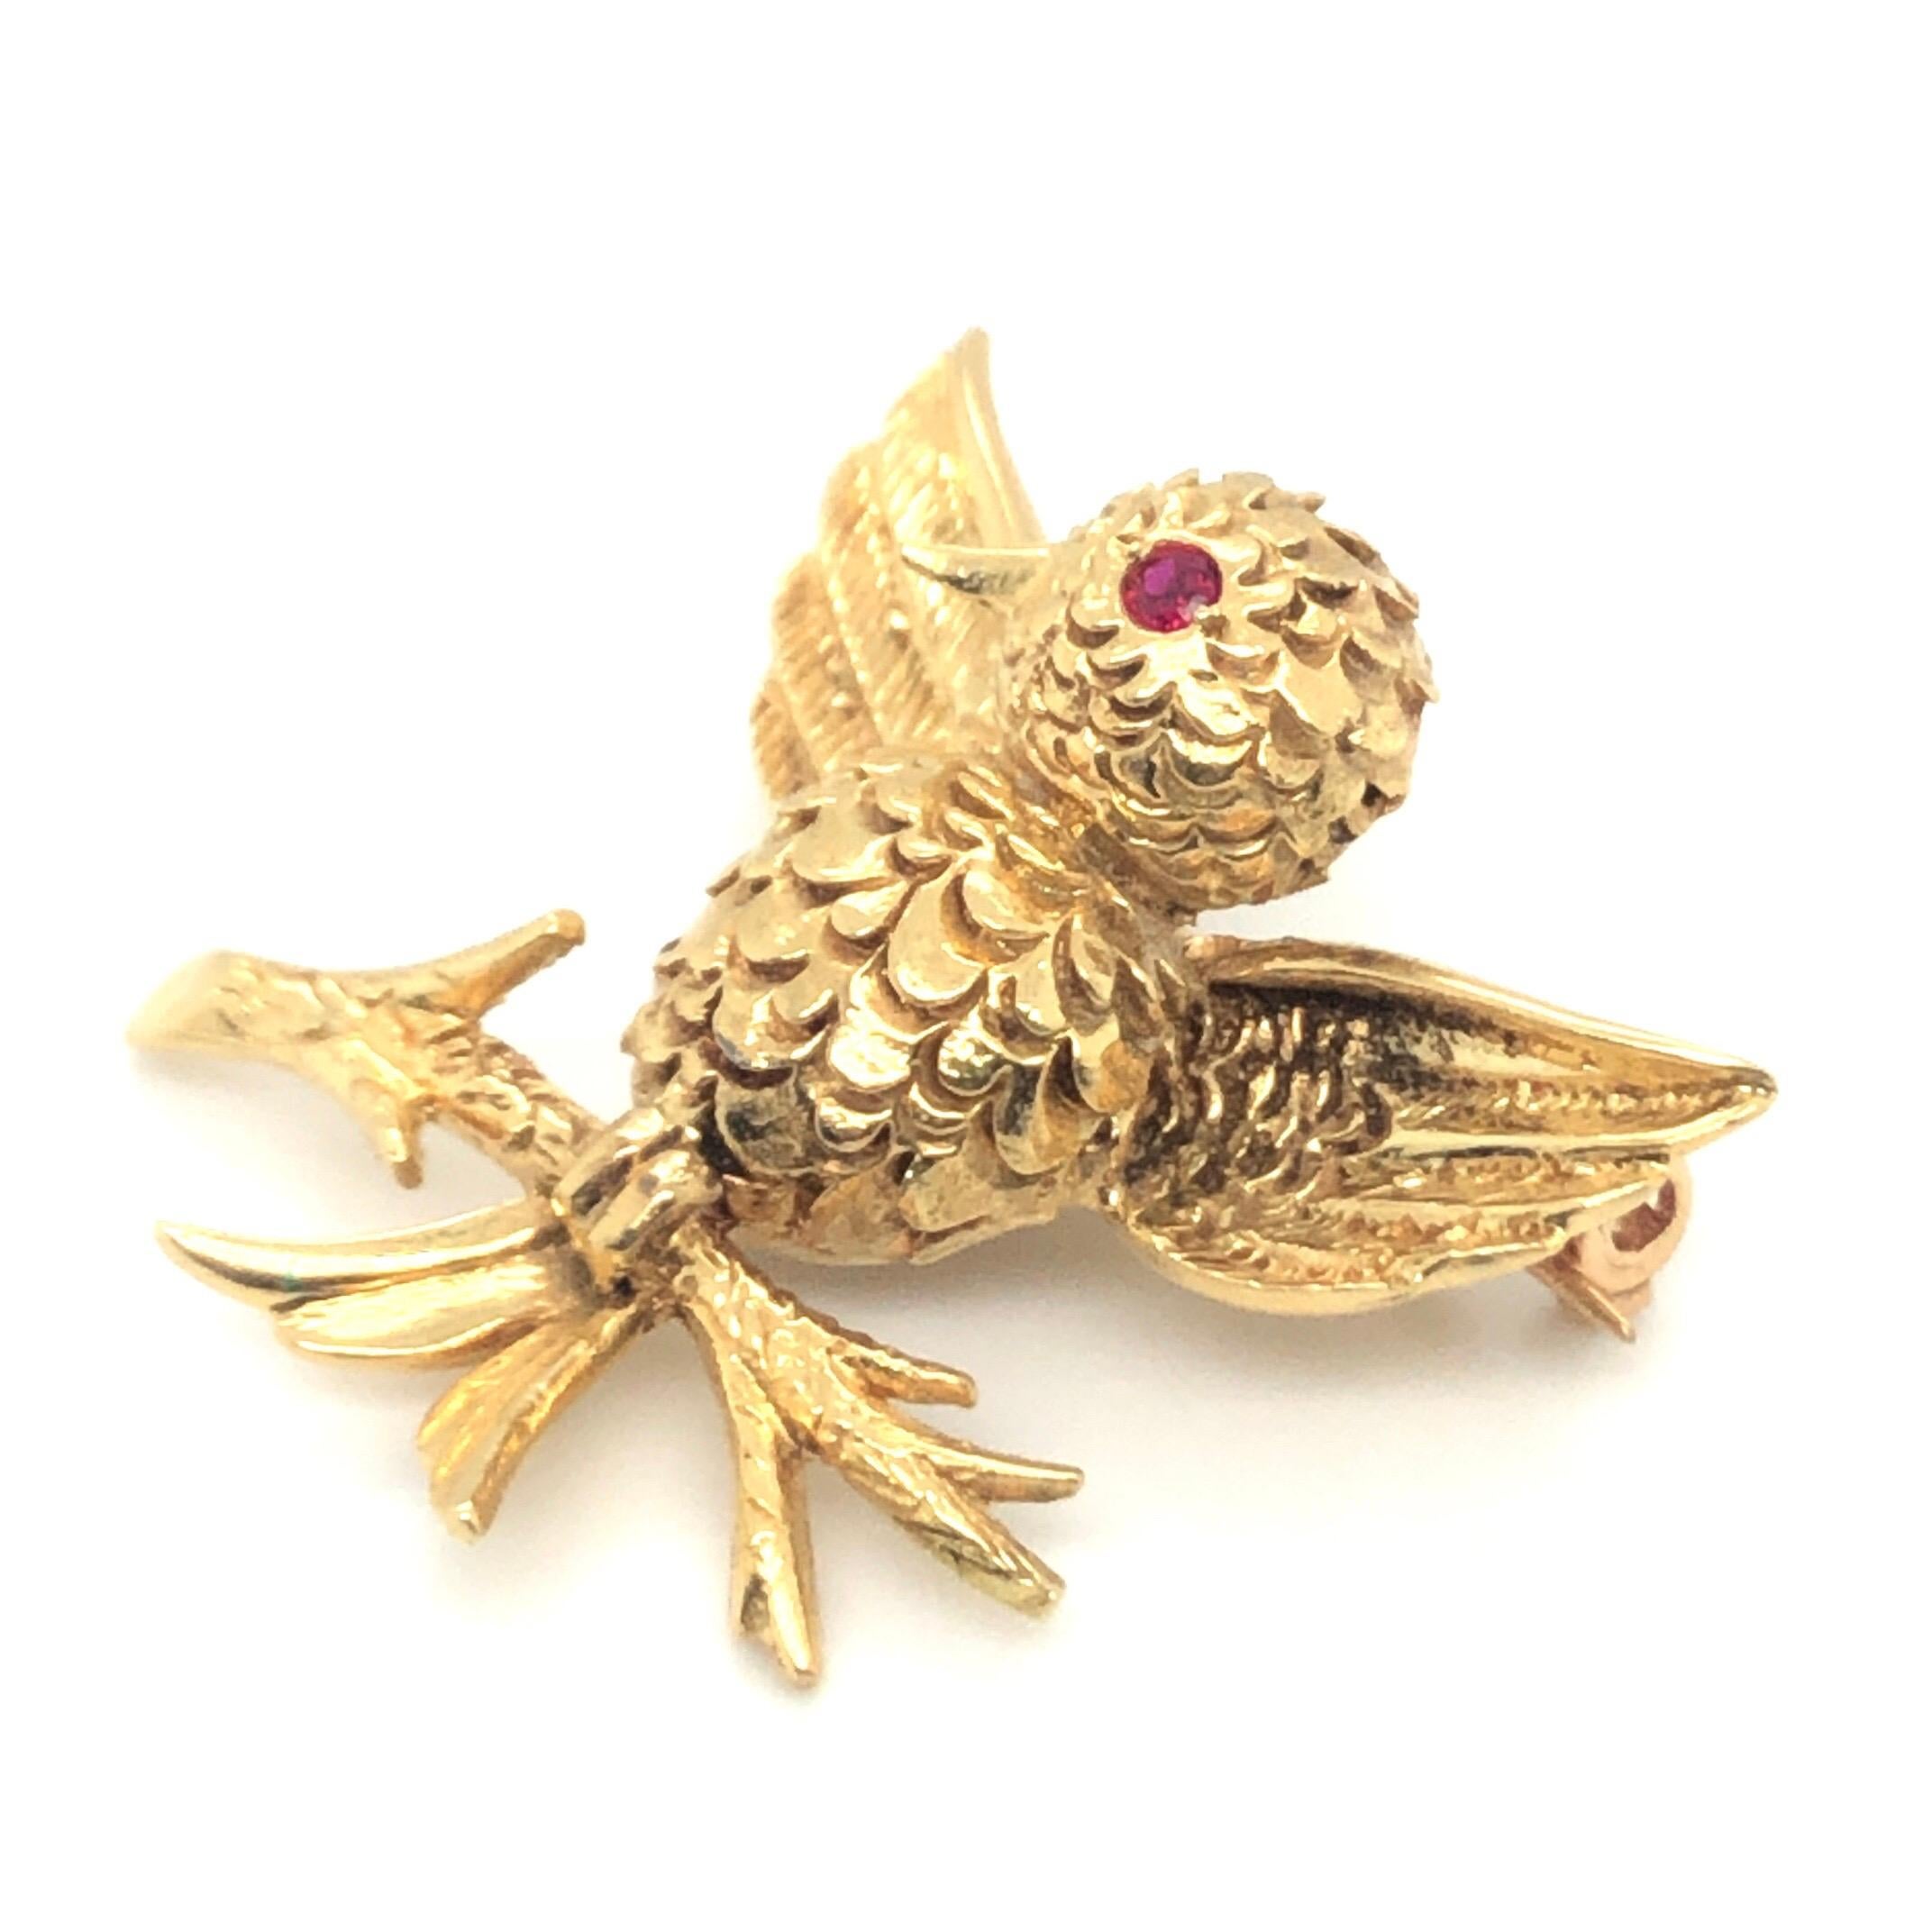 Adorable 18 karat yellow gold and ruby bird brooch pin by renowned French jewelry house Boucheron, 1960s.
Entirely crafted in 18 karat yellow gold and designed as a bird resting on a branch with open wings. The bird's eye is set with a tiny